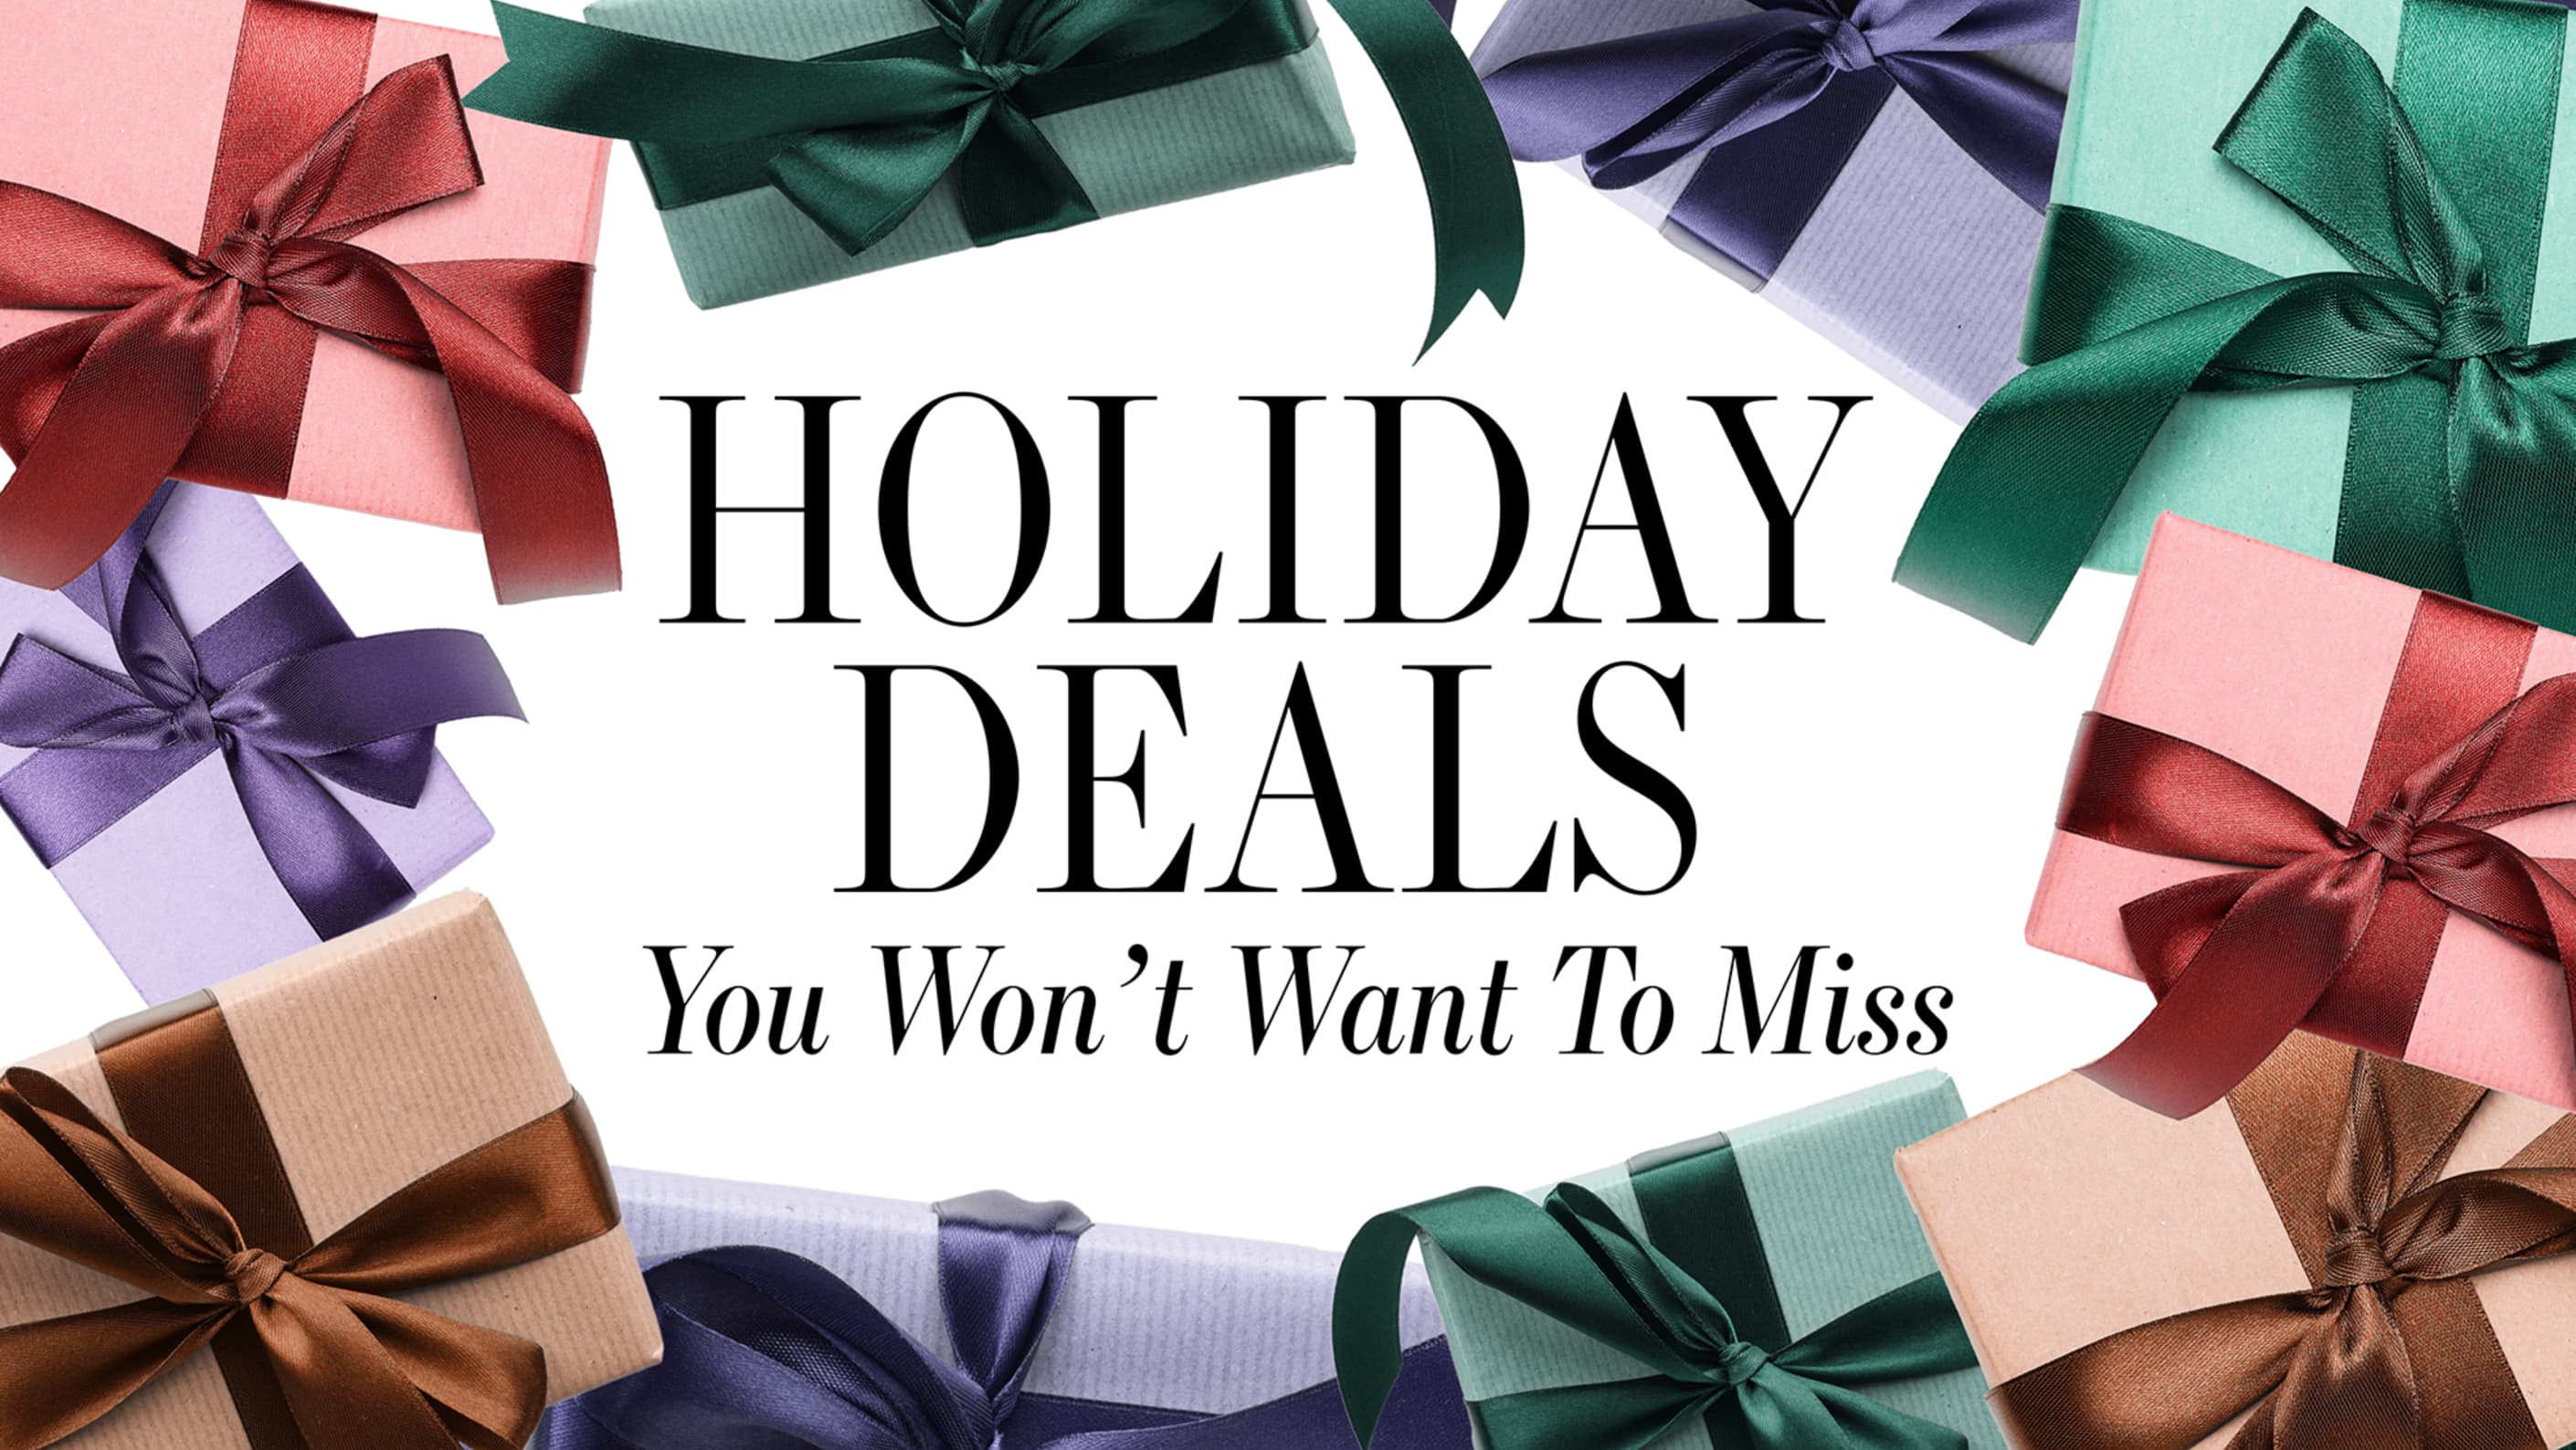 26 Holiday Deals You Won’t Want to Miss